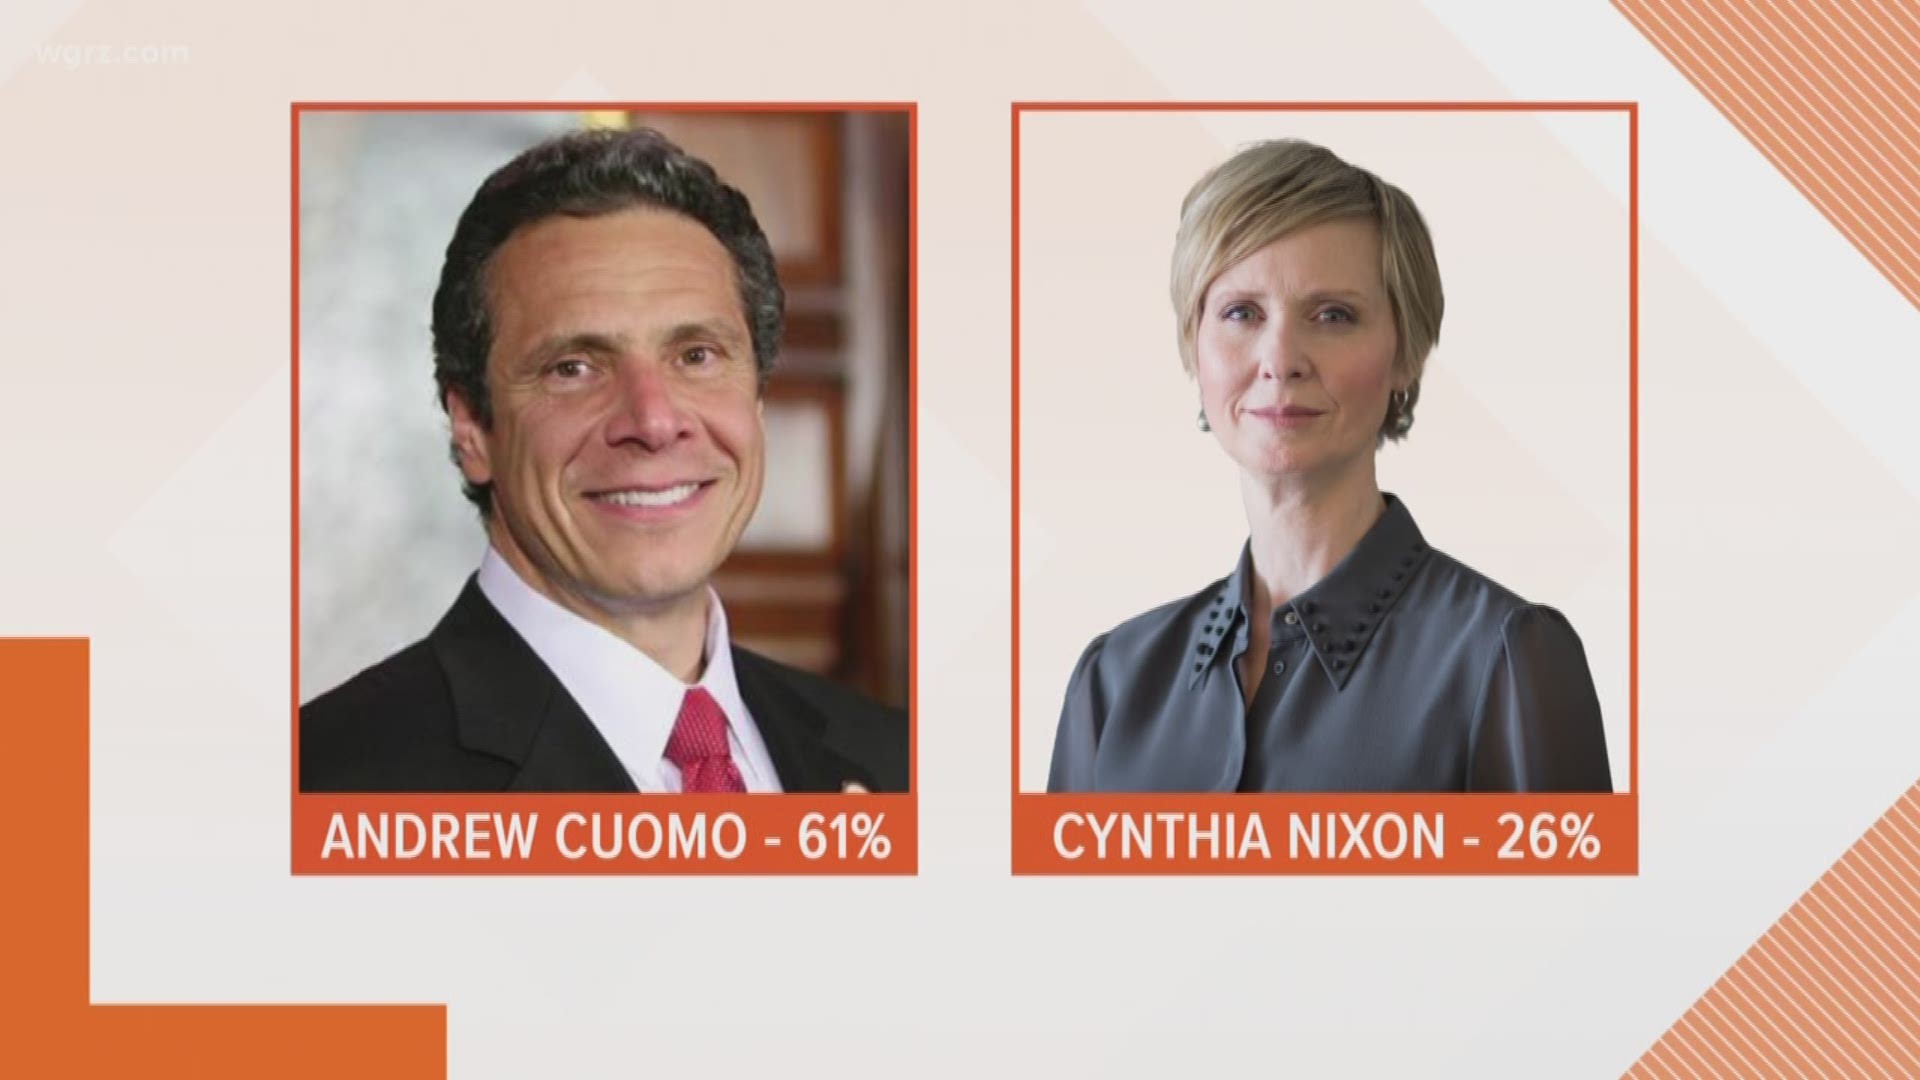 Cynthia Nixon is struggling to close a large gap between her and Gov. Andrew Cuomo in New York's Democratic primary race, according to a poll released Wednesday.